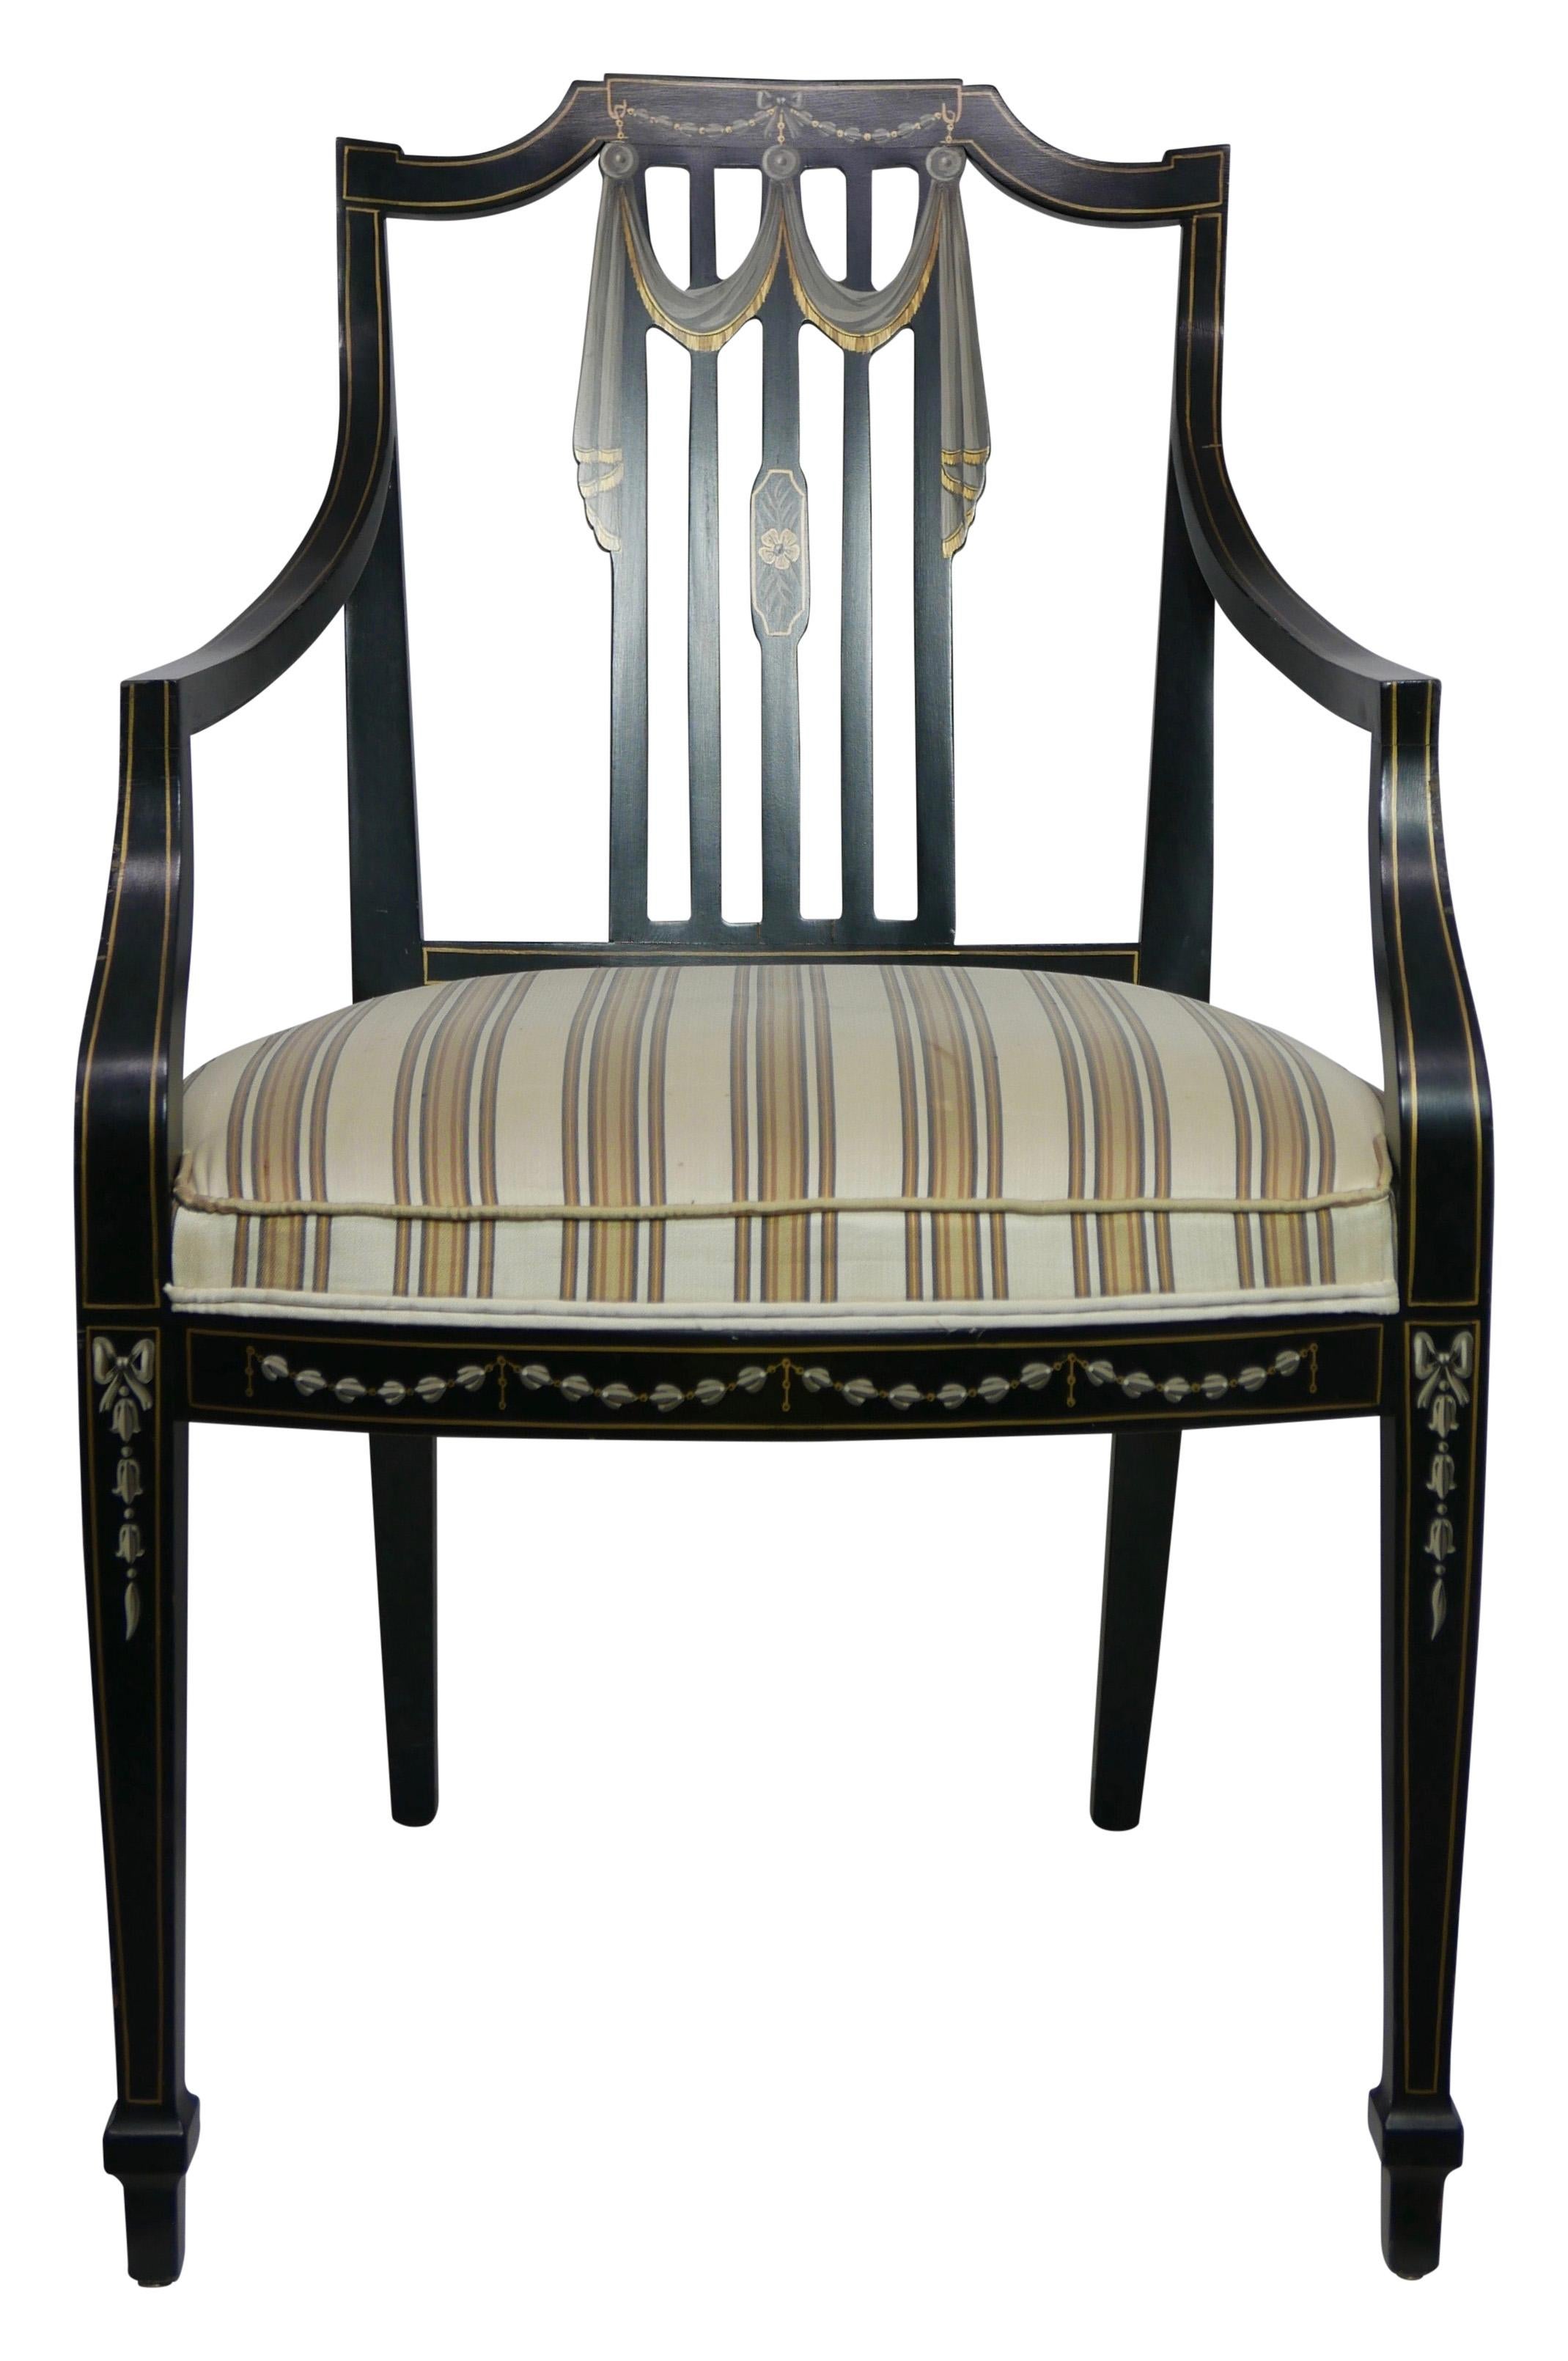 A set of four Sheraton style dining chairs painted black and having painted decorations with draped swags of blue bells.
American, early to mid 20th century
Vintage fabric shows light signs of use and age.
Chair frames are in excellent condition,